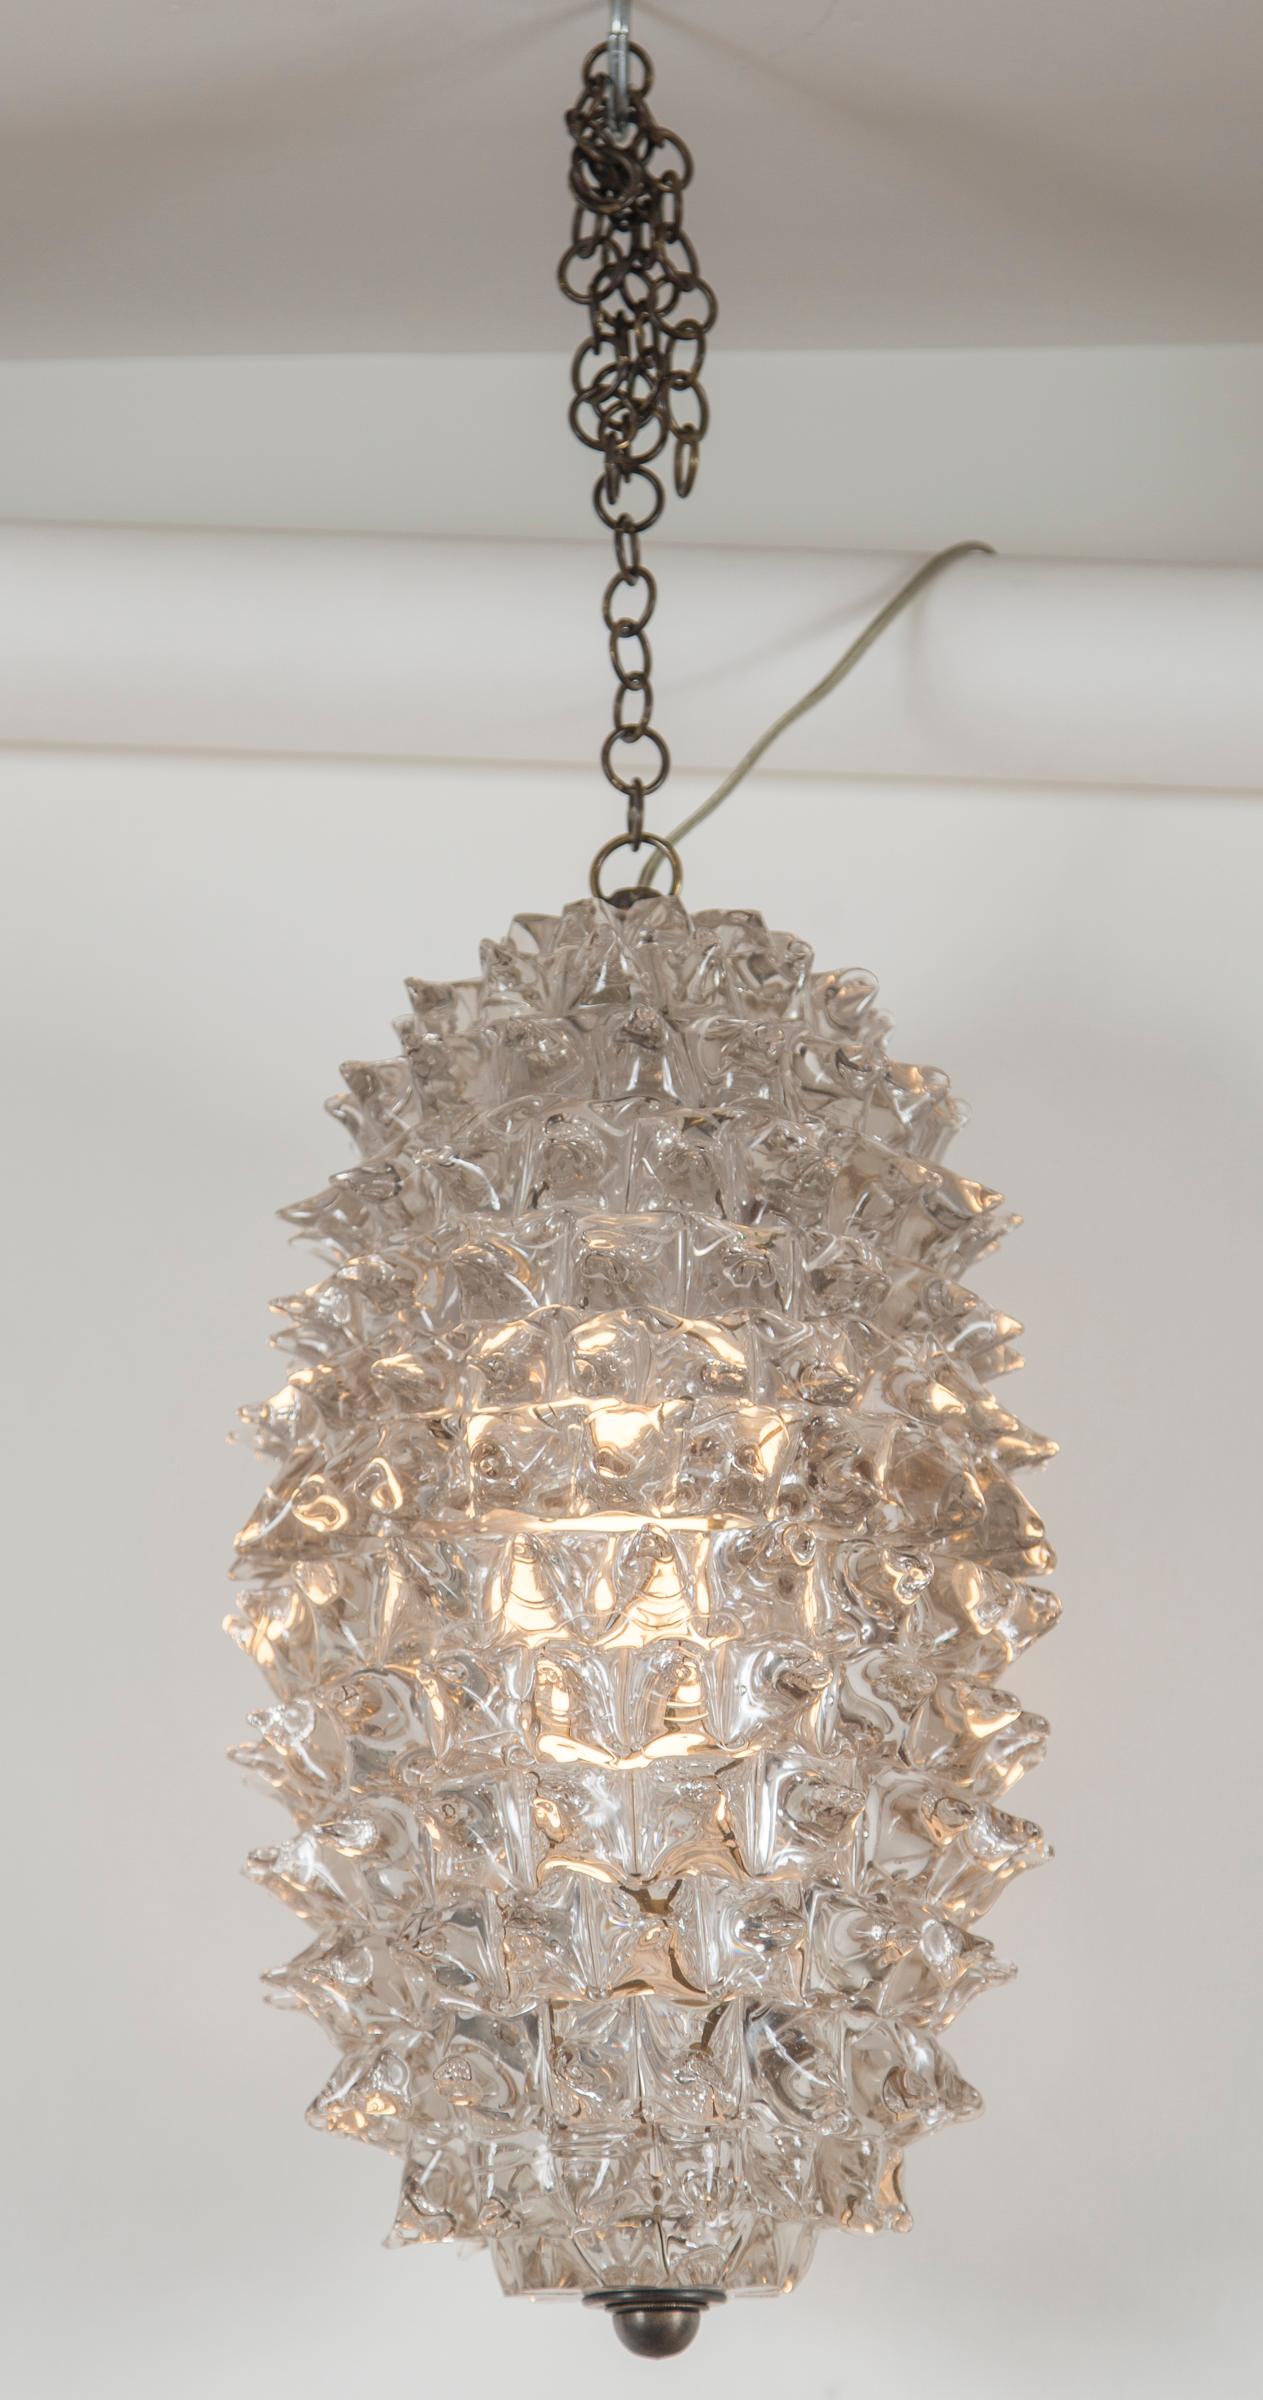 Modern Vintage Rostrato Oval Ceiling Pendant by Ercole Barovier